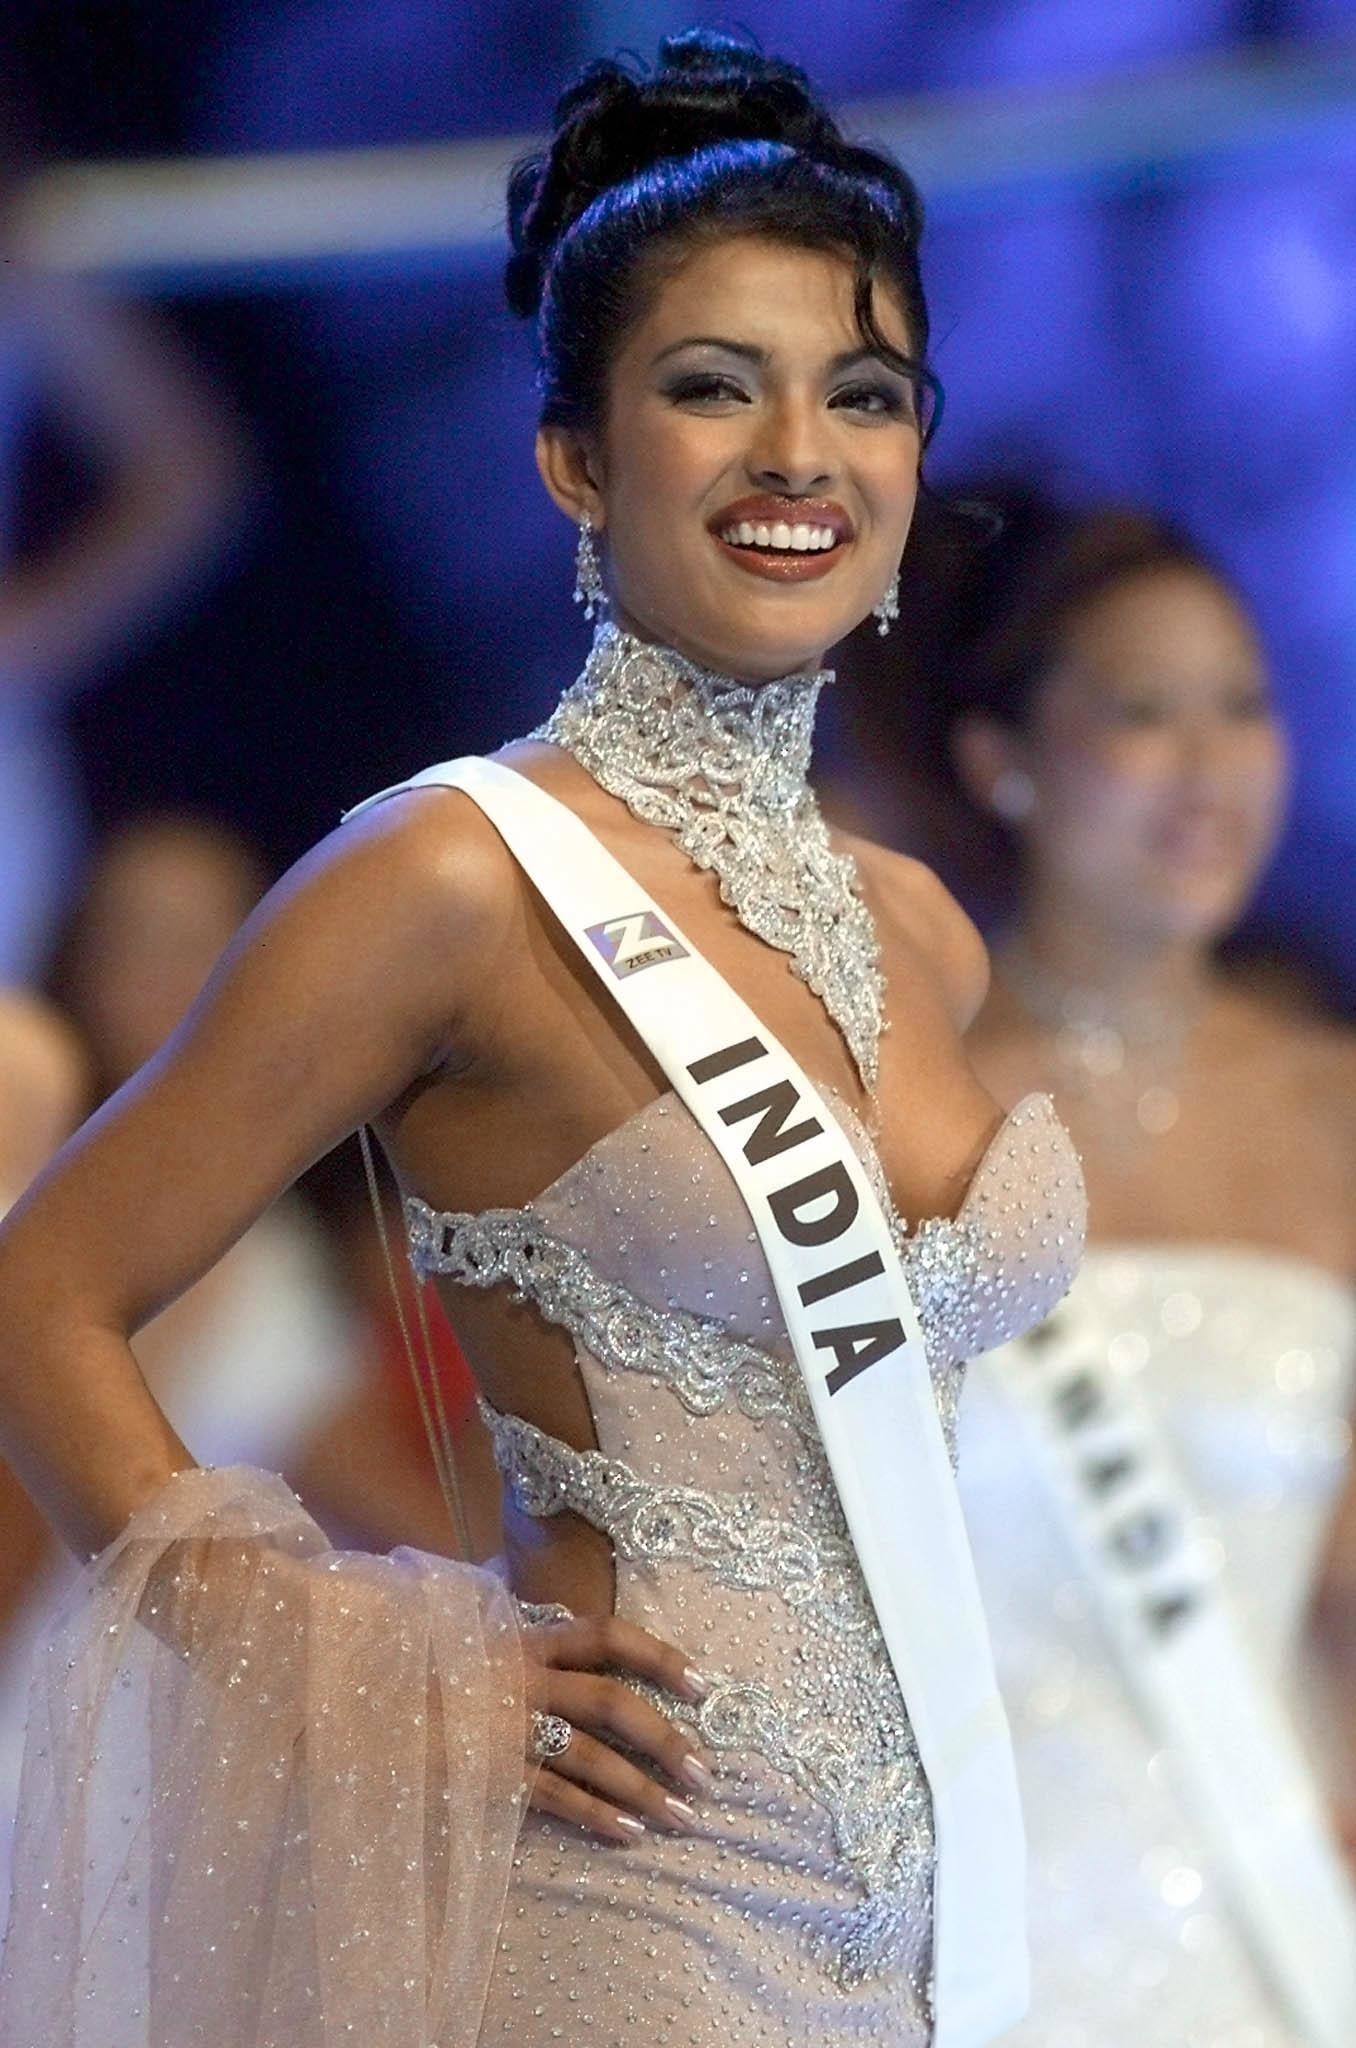 closeup of priyanka during the pageant